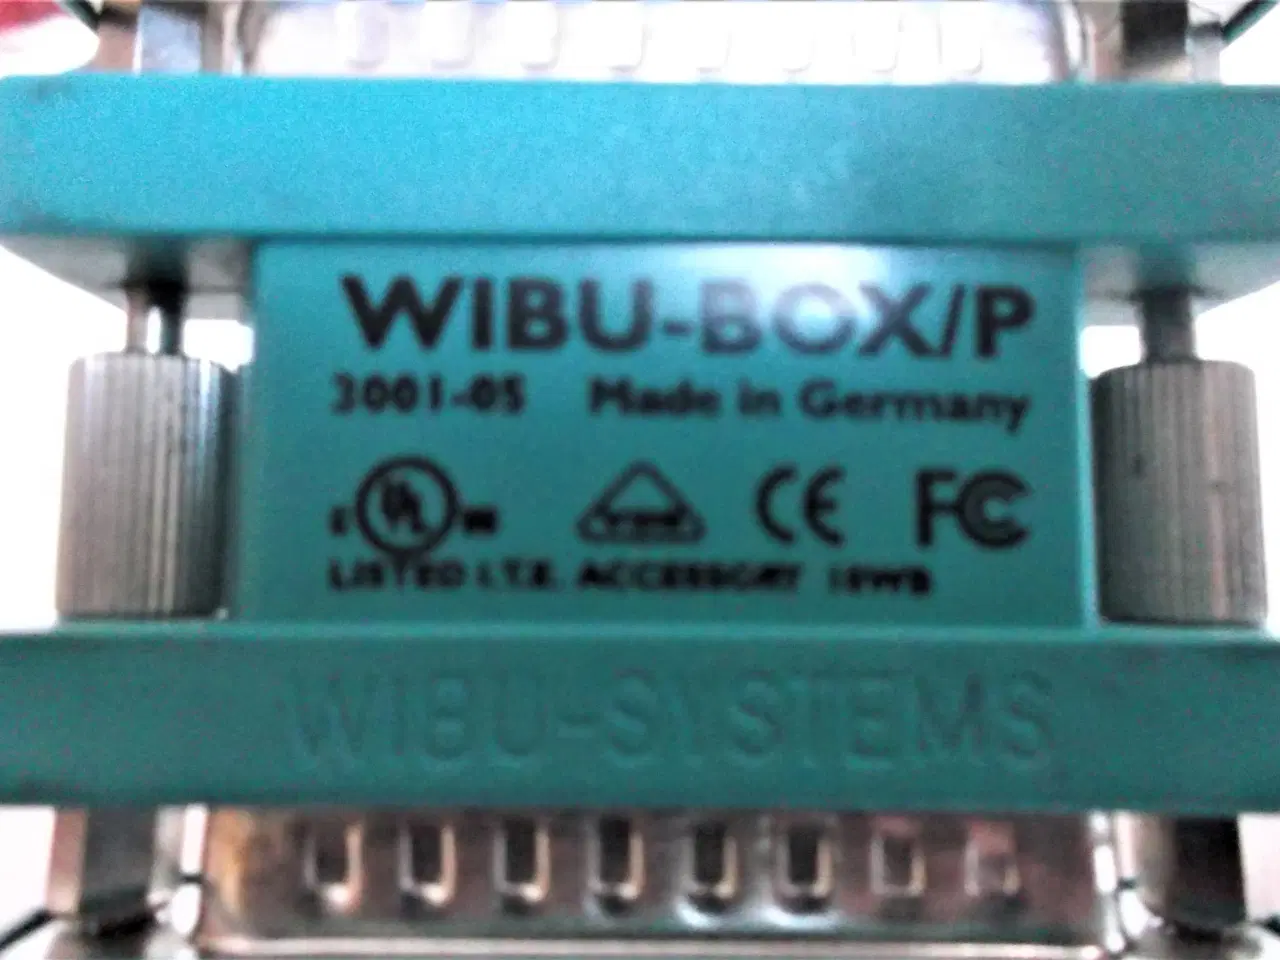 Billede 3 - Wibu-Box/P is the WibuKey protection hardware